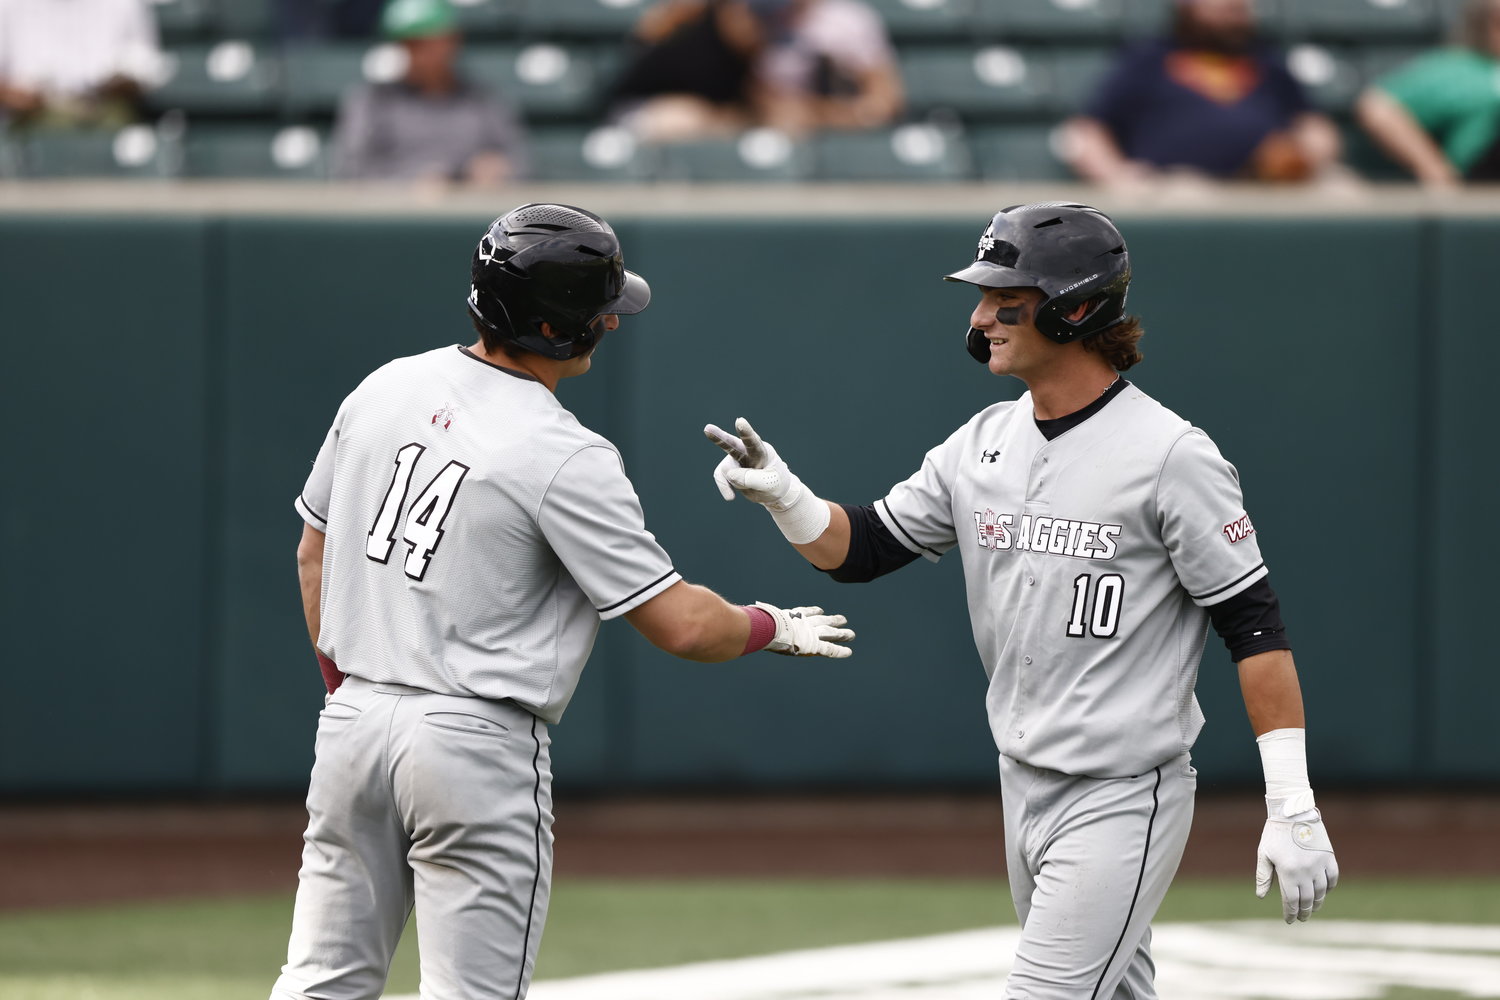 New Mexico State University’s Logan Gallina, 10, and Tommy Tabak, 14, celebrate during the Aggies’ 15-14 win over Utah Valley May 19 in Orem, Utah.